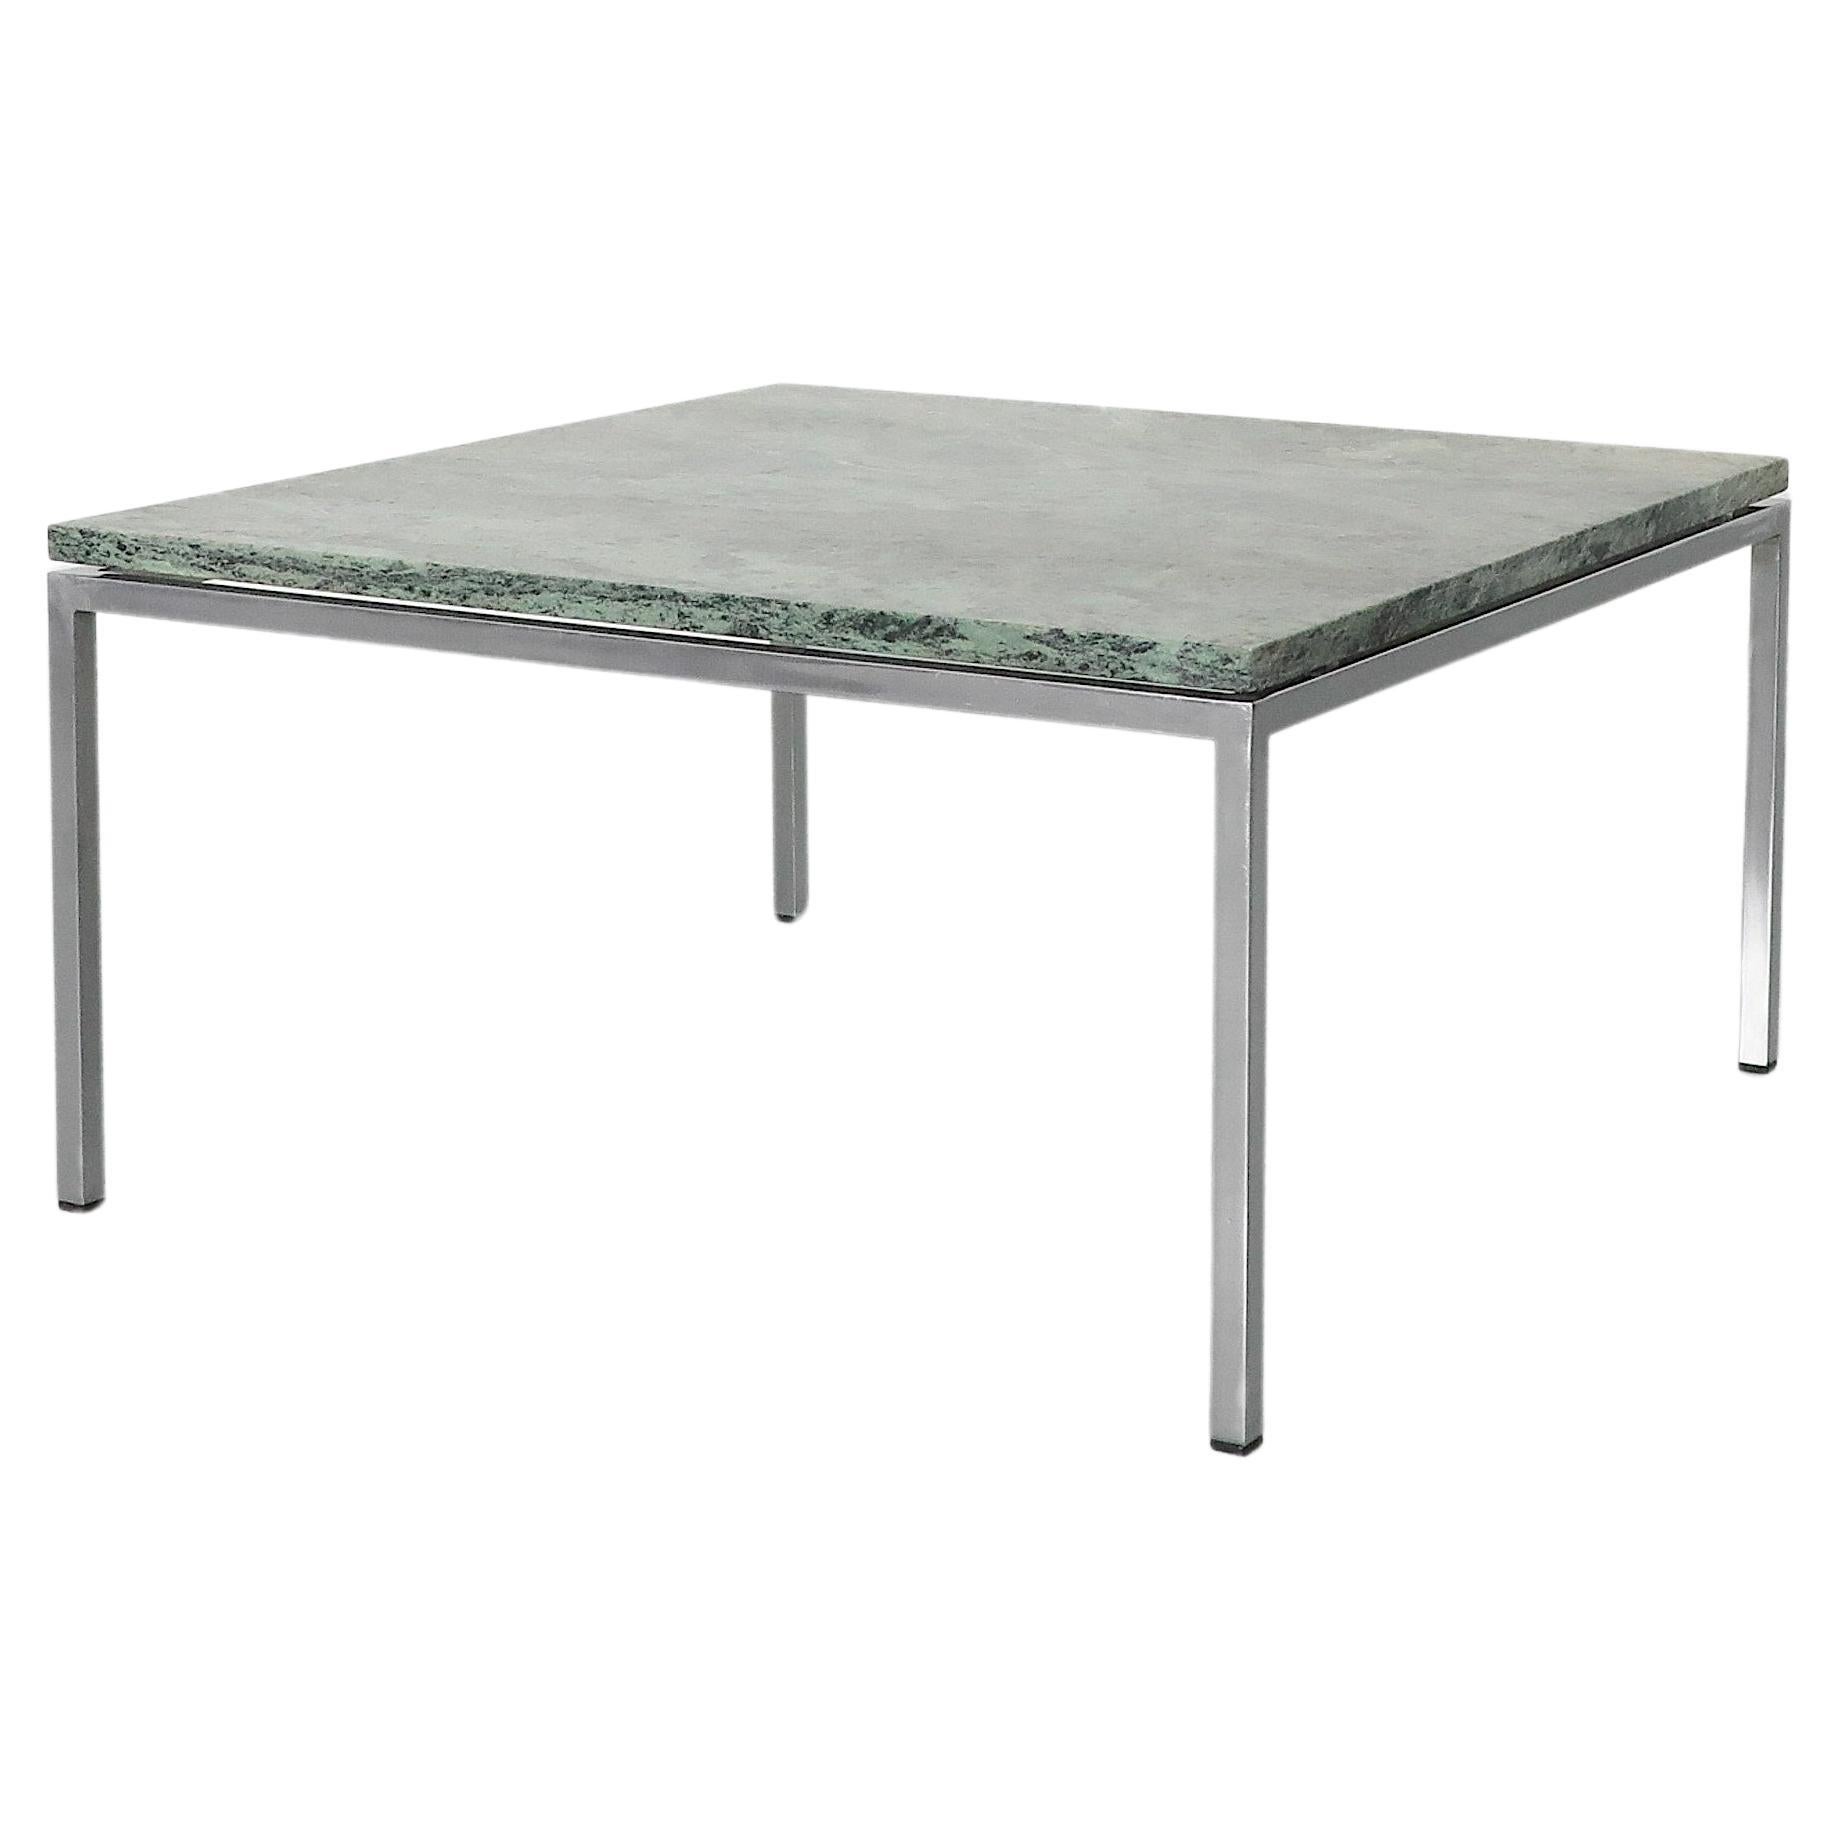 Metaform chrome coffee table with green marble top